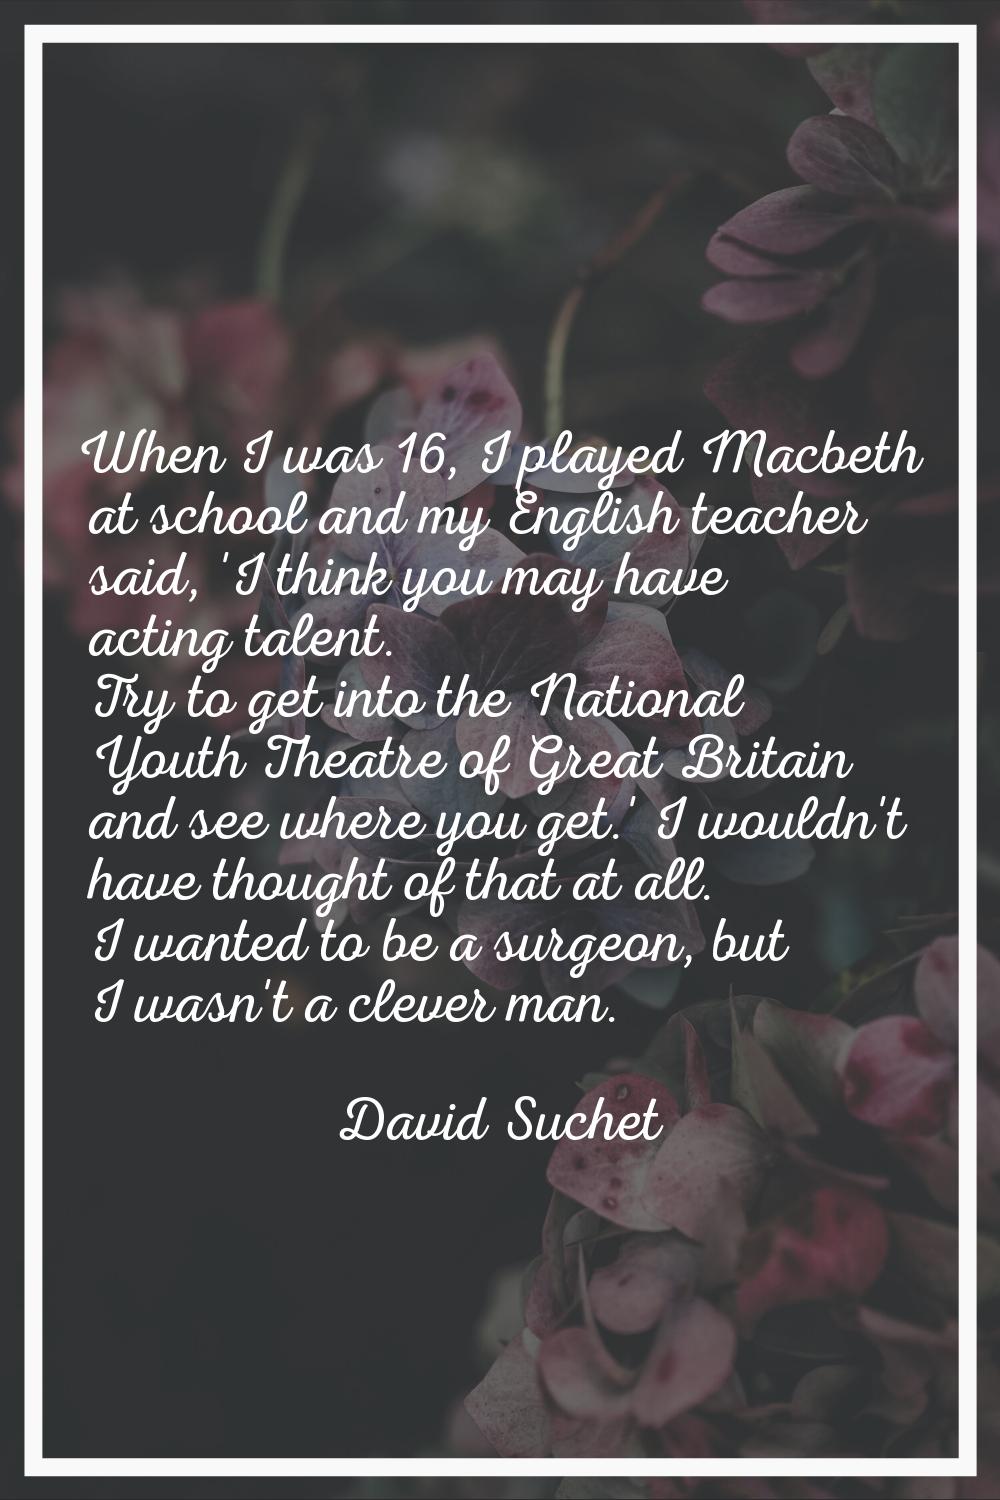 When I was 16, I played Macbeth at school and my English teacher said, 'I think you may have acting